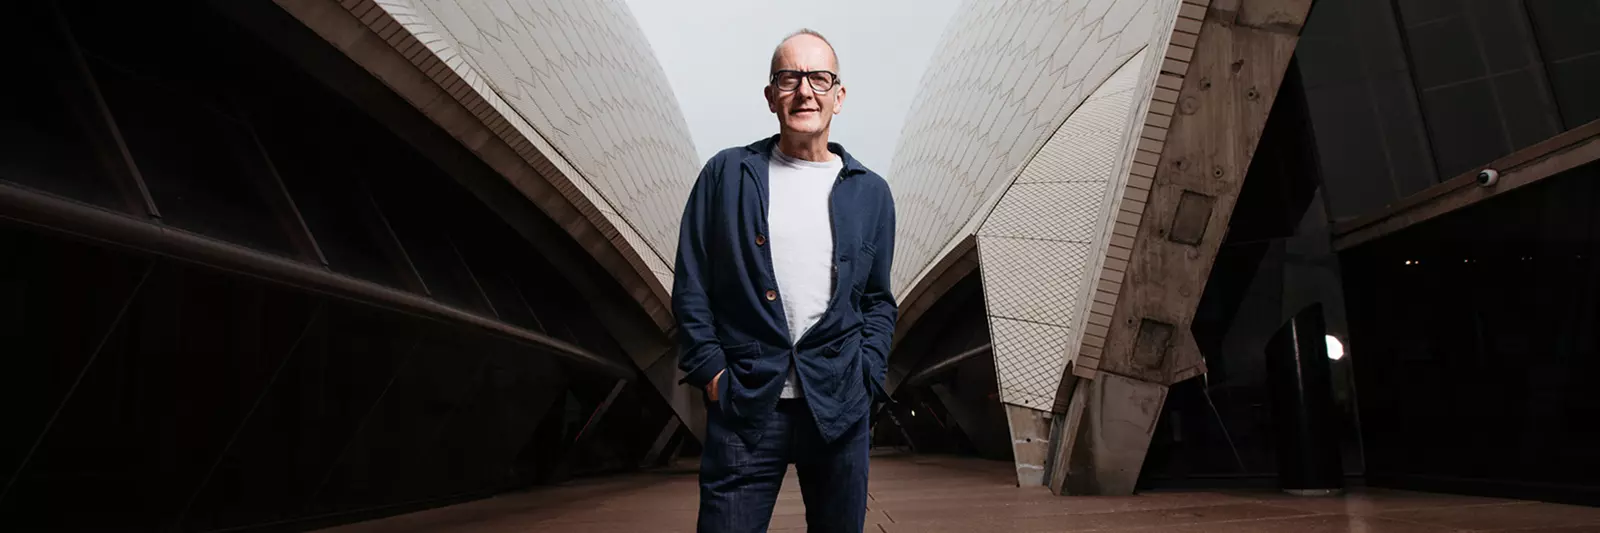 A man in glasses and a suit standing outside the Sydney Opera House.